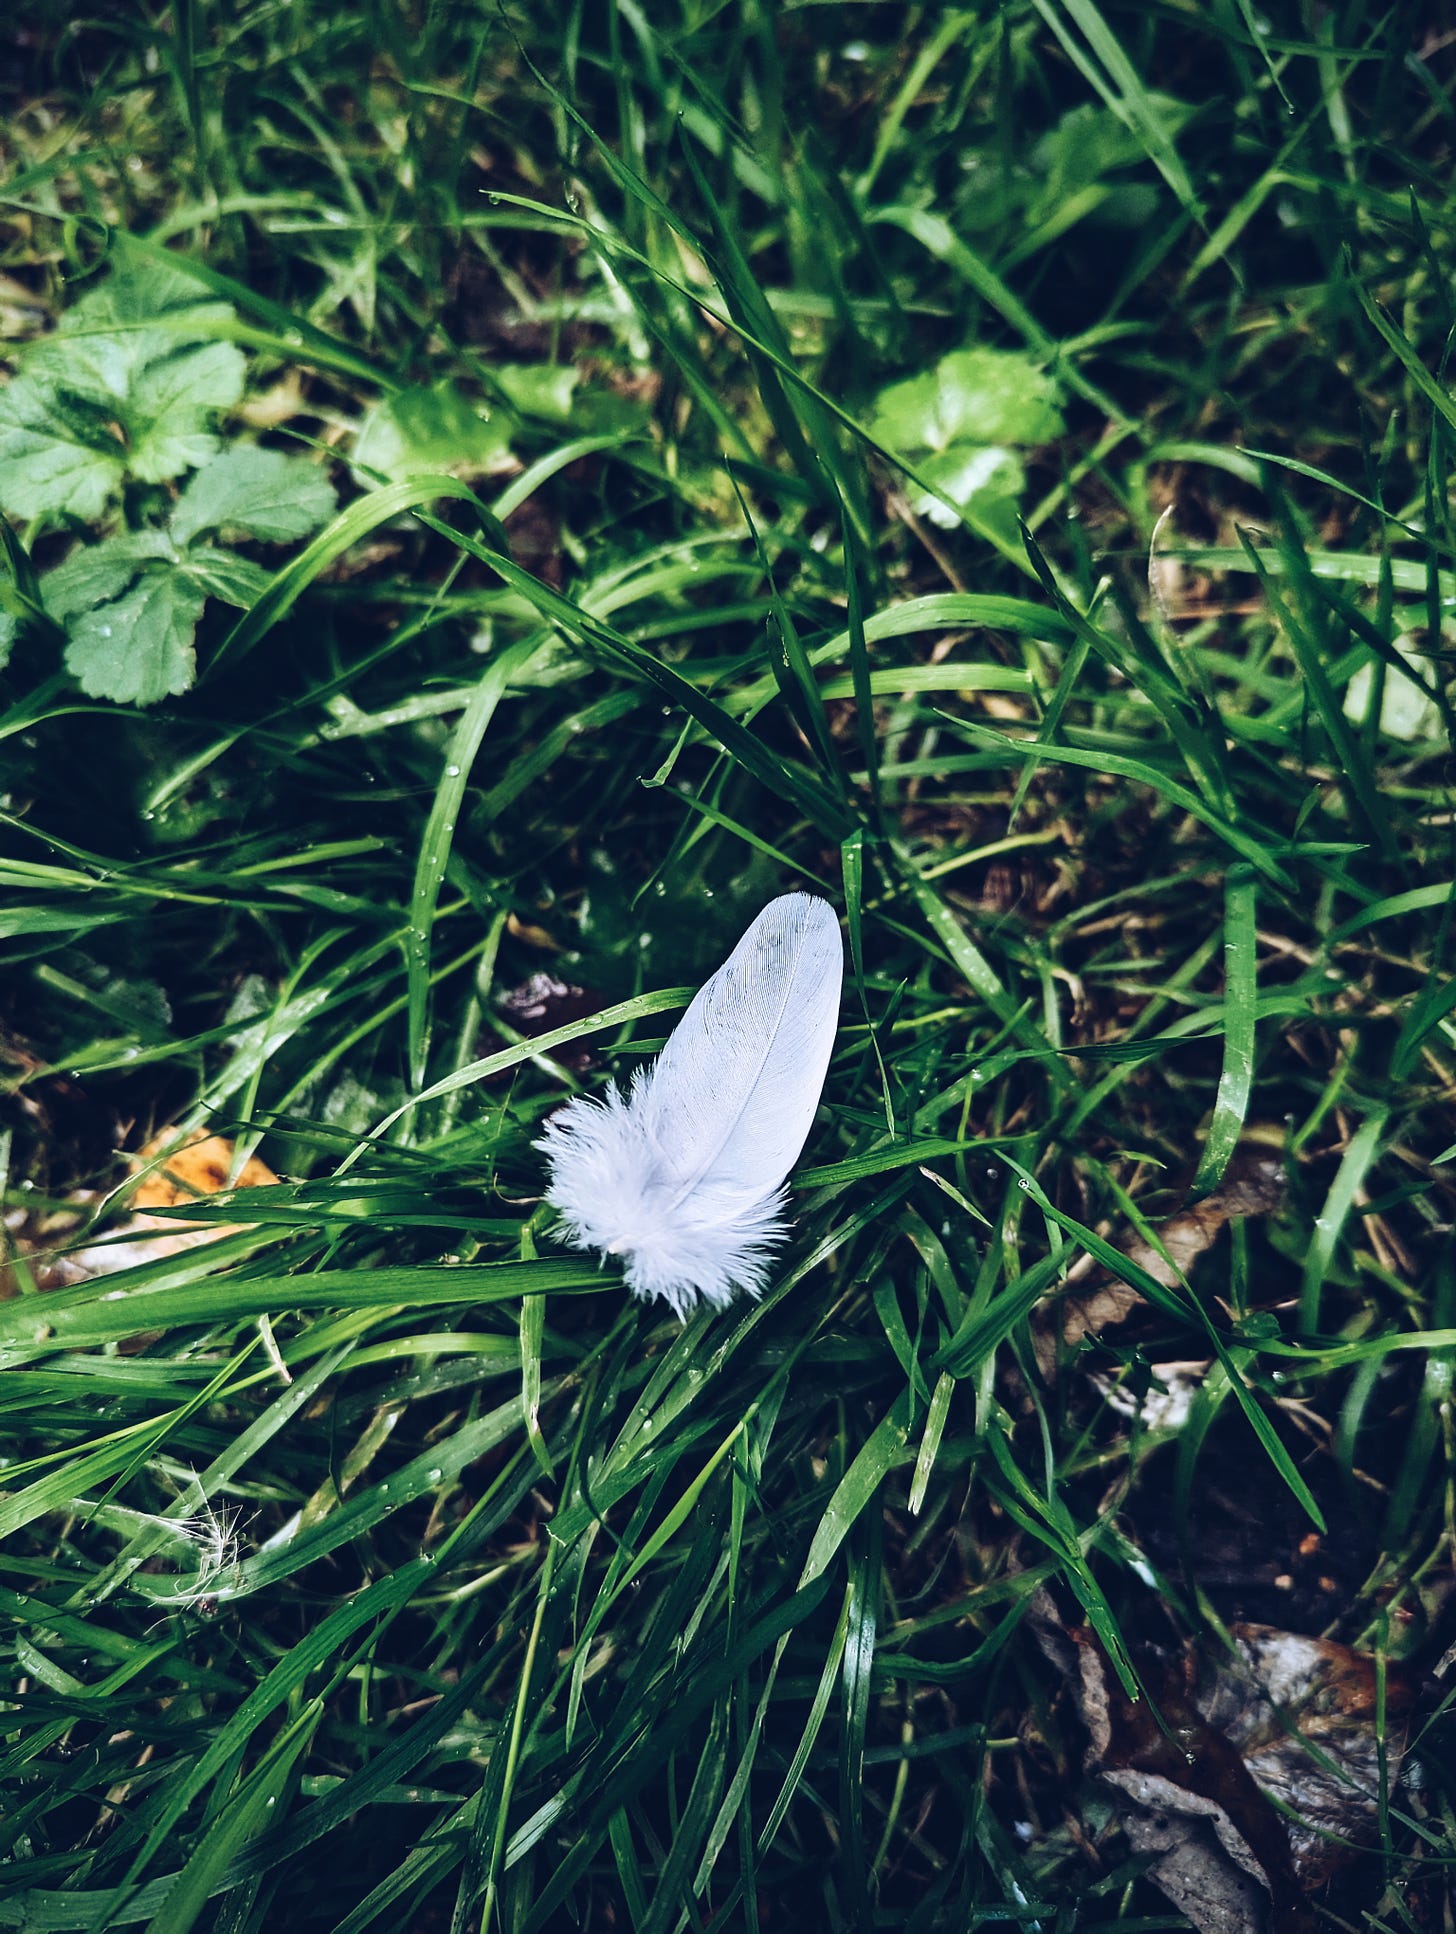 A small, pure white feather sits cloud-like atop long green blades of grass.